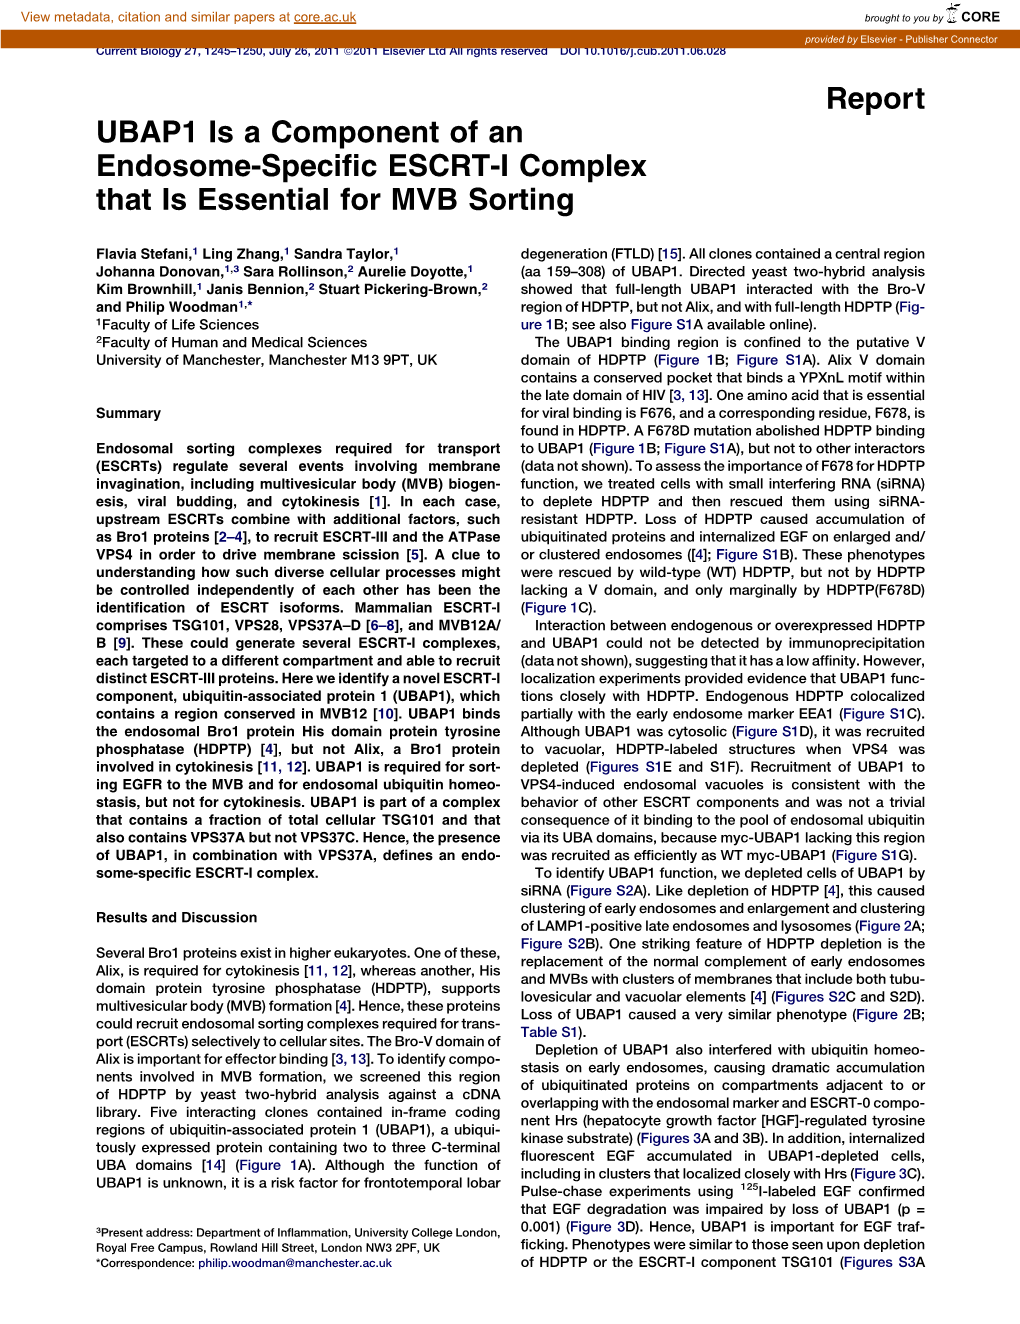 UBAP1 Is a Component of an Endosome-Specific ESCRT